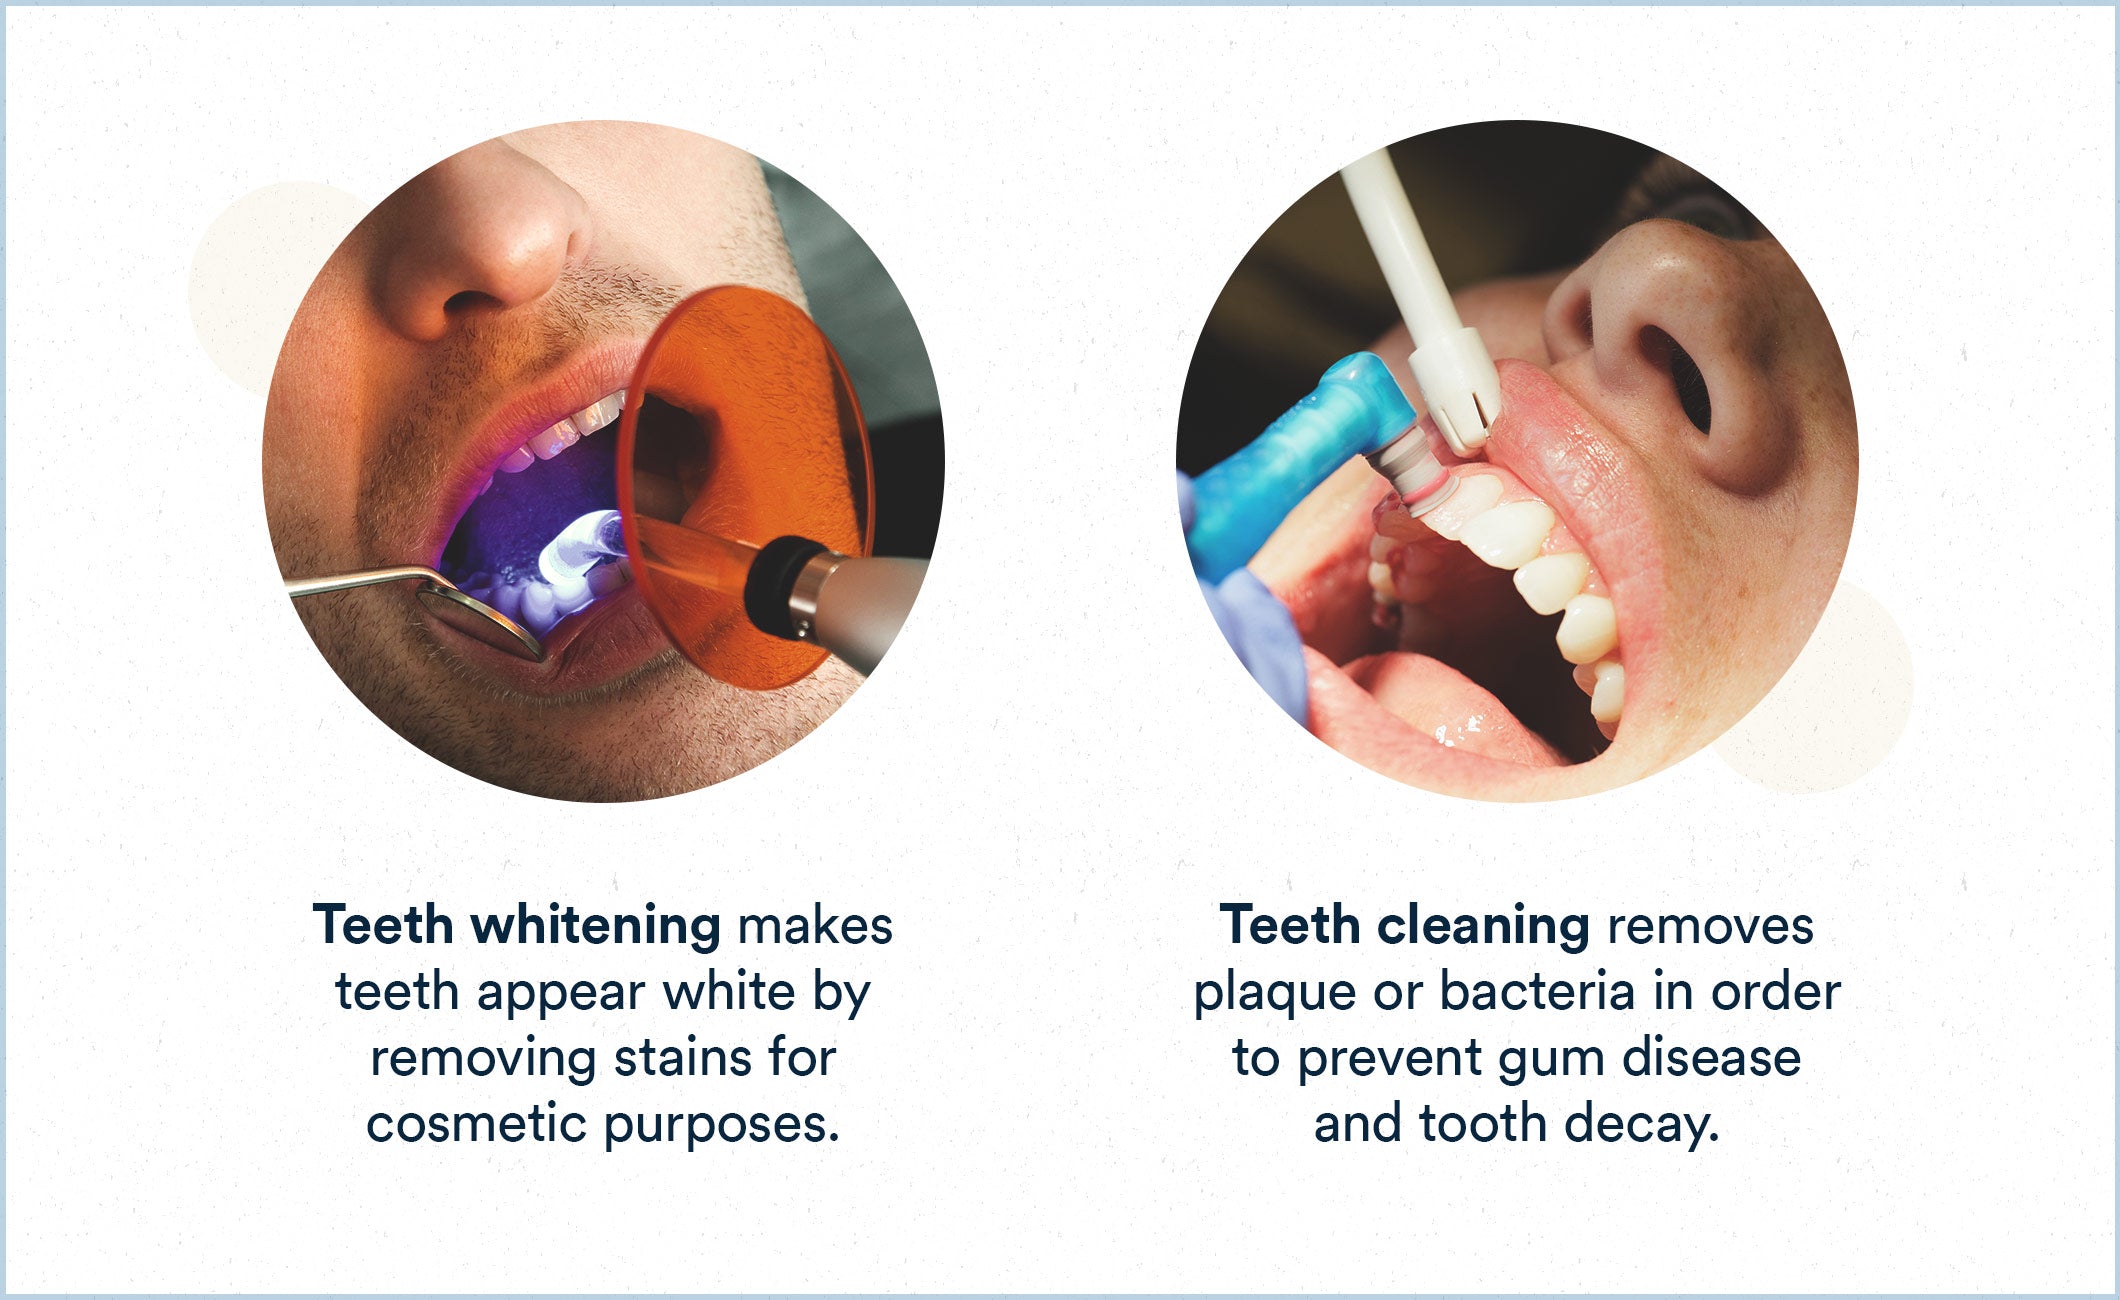 teeth whitening makes your teeth appear white and teeth cleaning removes plaque